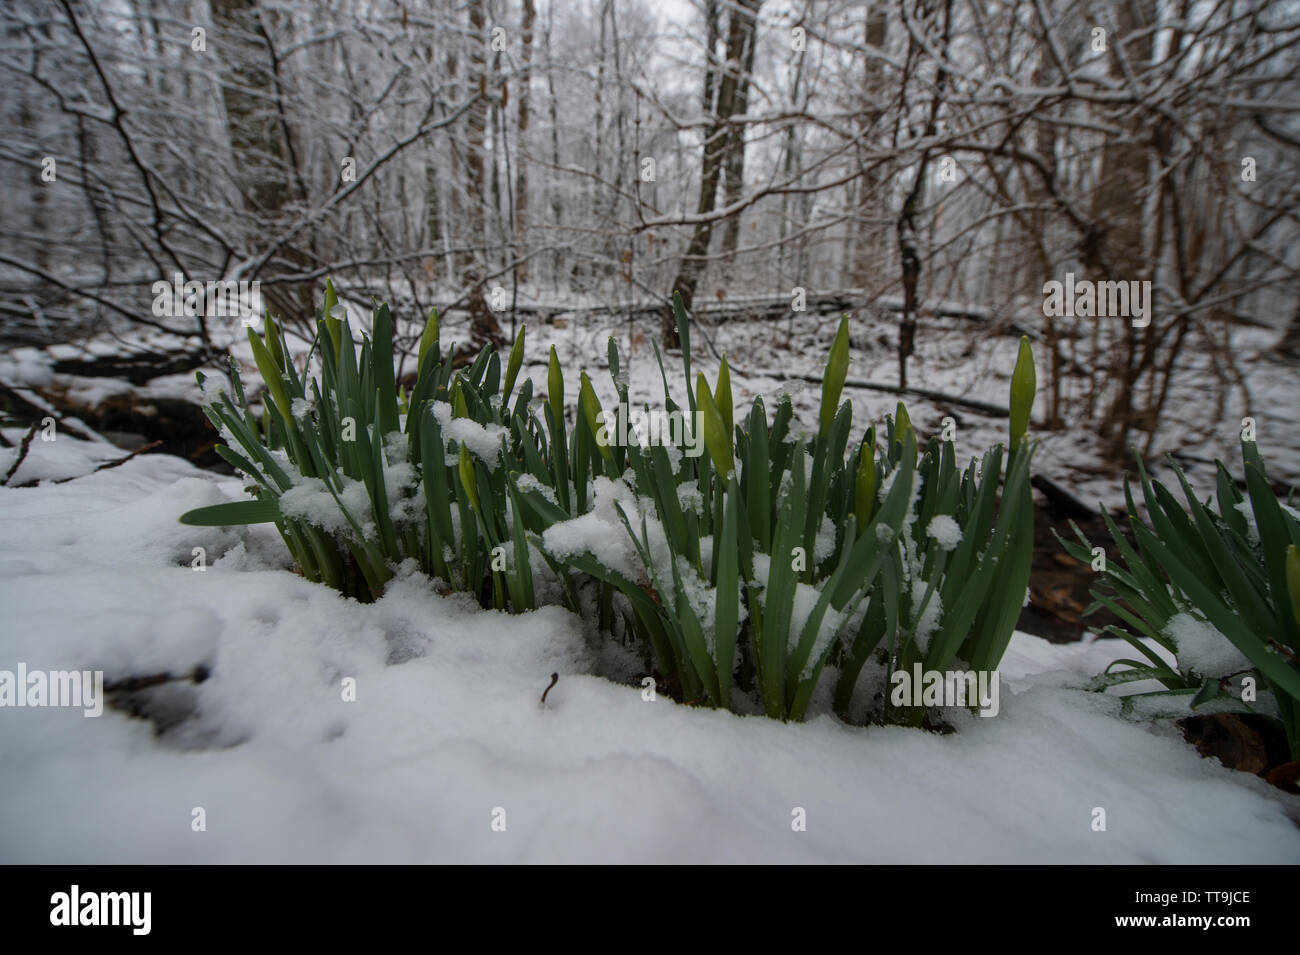 UNITED STATES: MARCH 20, 2015: A late season snow storm on the first day of spring in the Blueridge Mountains of Virginia laid down about four inches Stock Photo